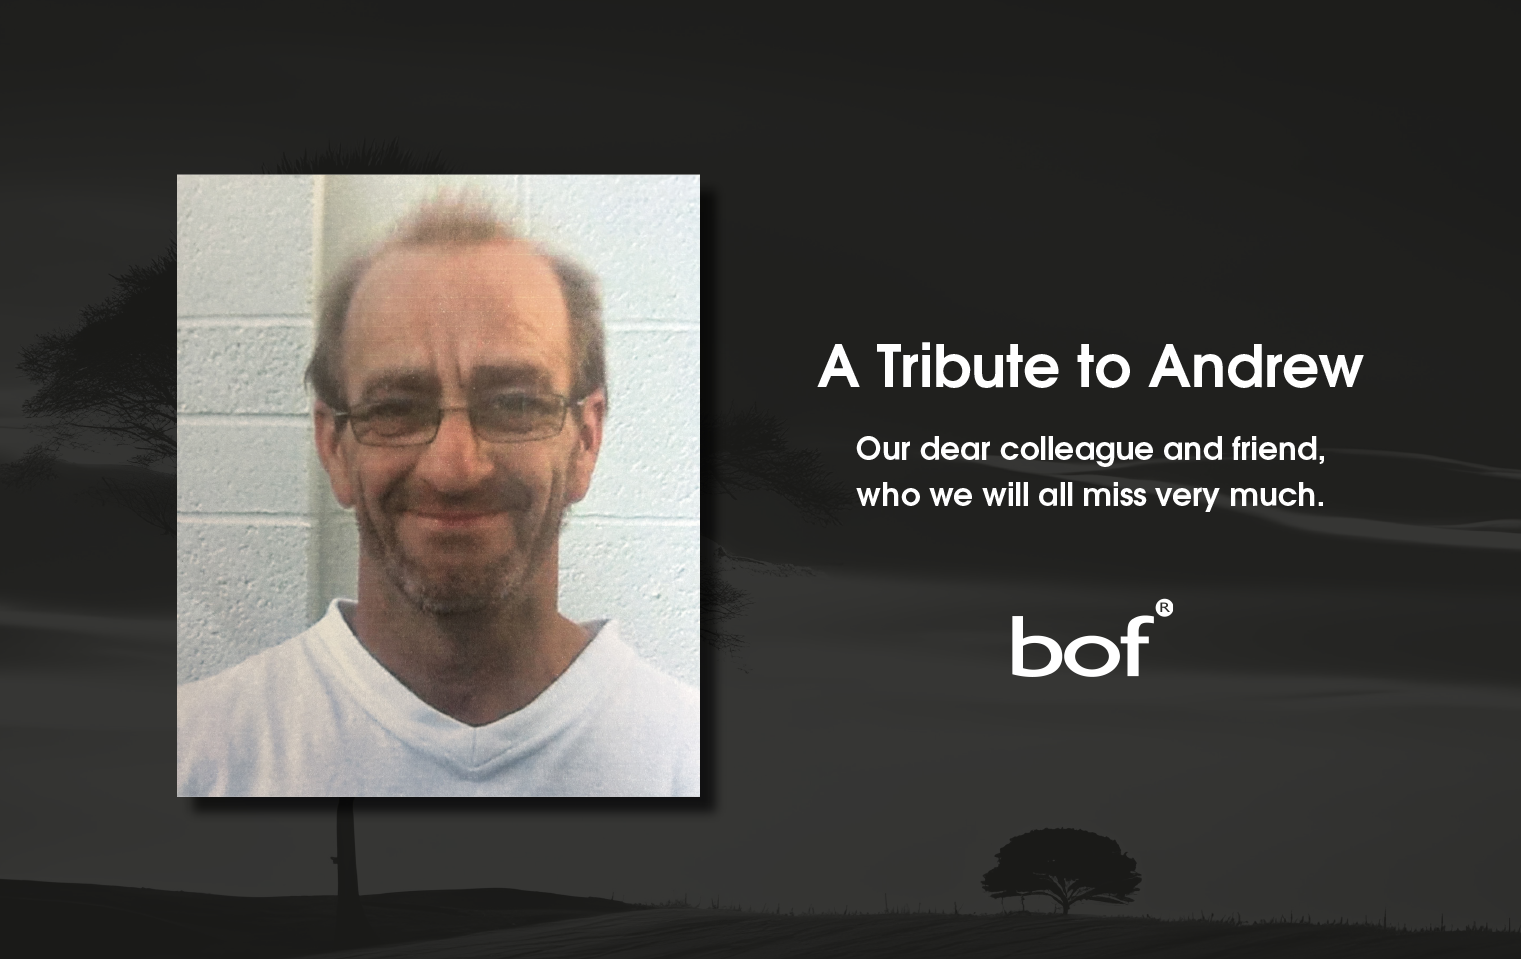 A Tribute to Andrew - our dear colleague and friend, who we will all miss very much